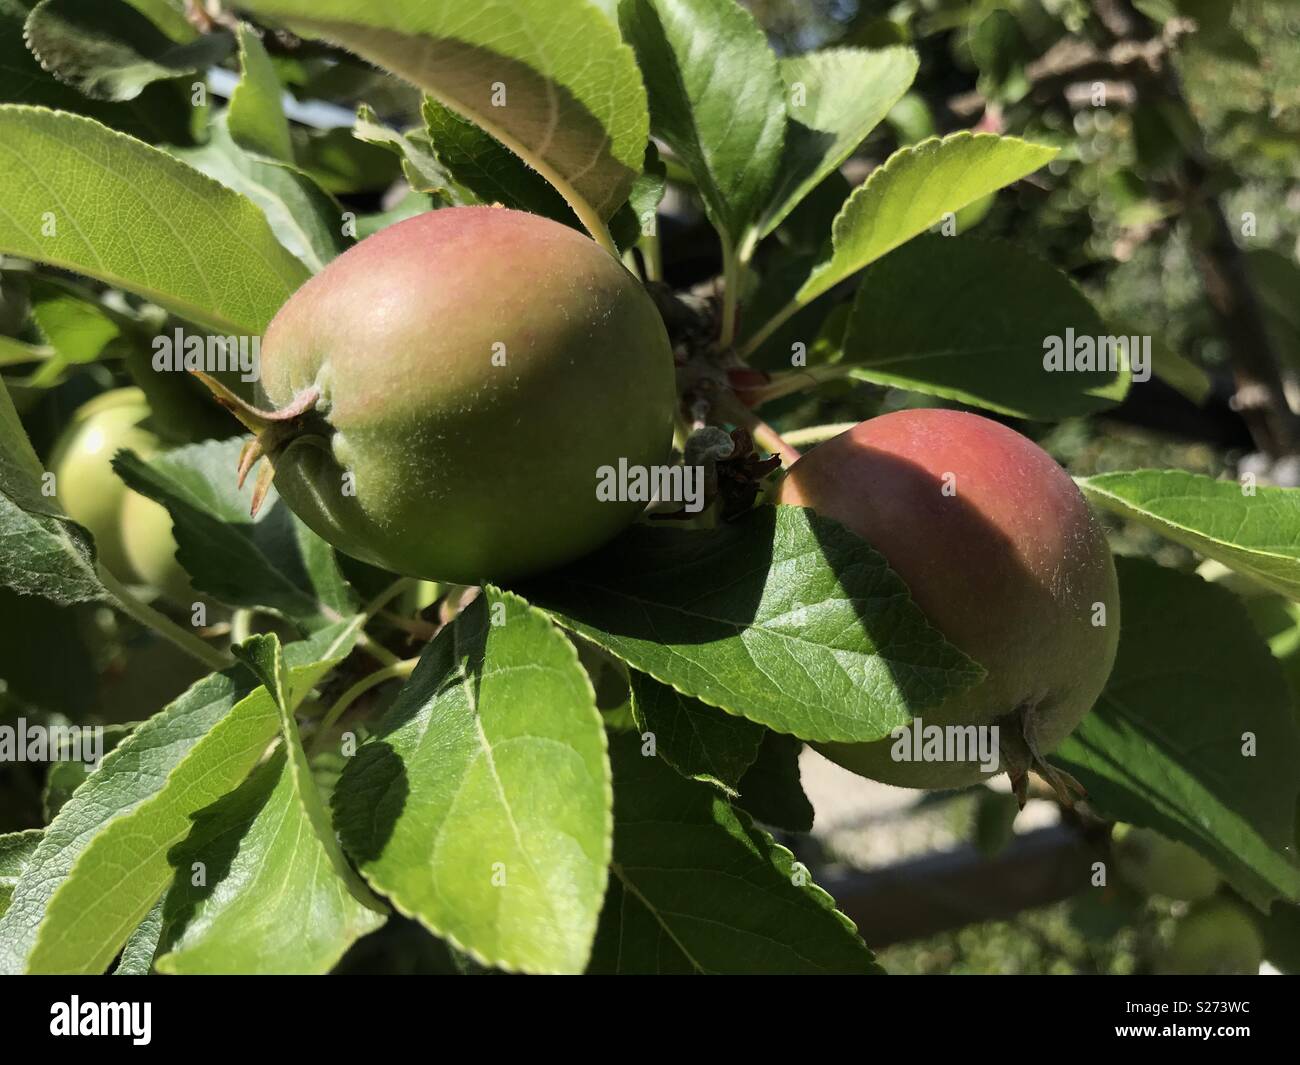 Apples “James Grieves” ripening on tree, Cheshire, England. Stock Photo